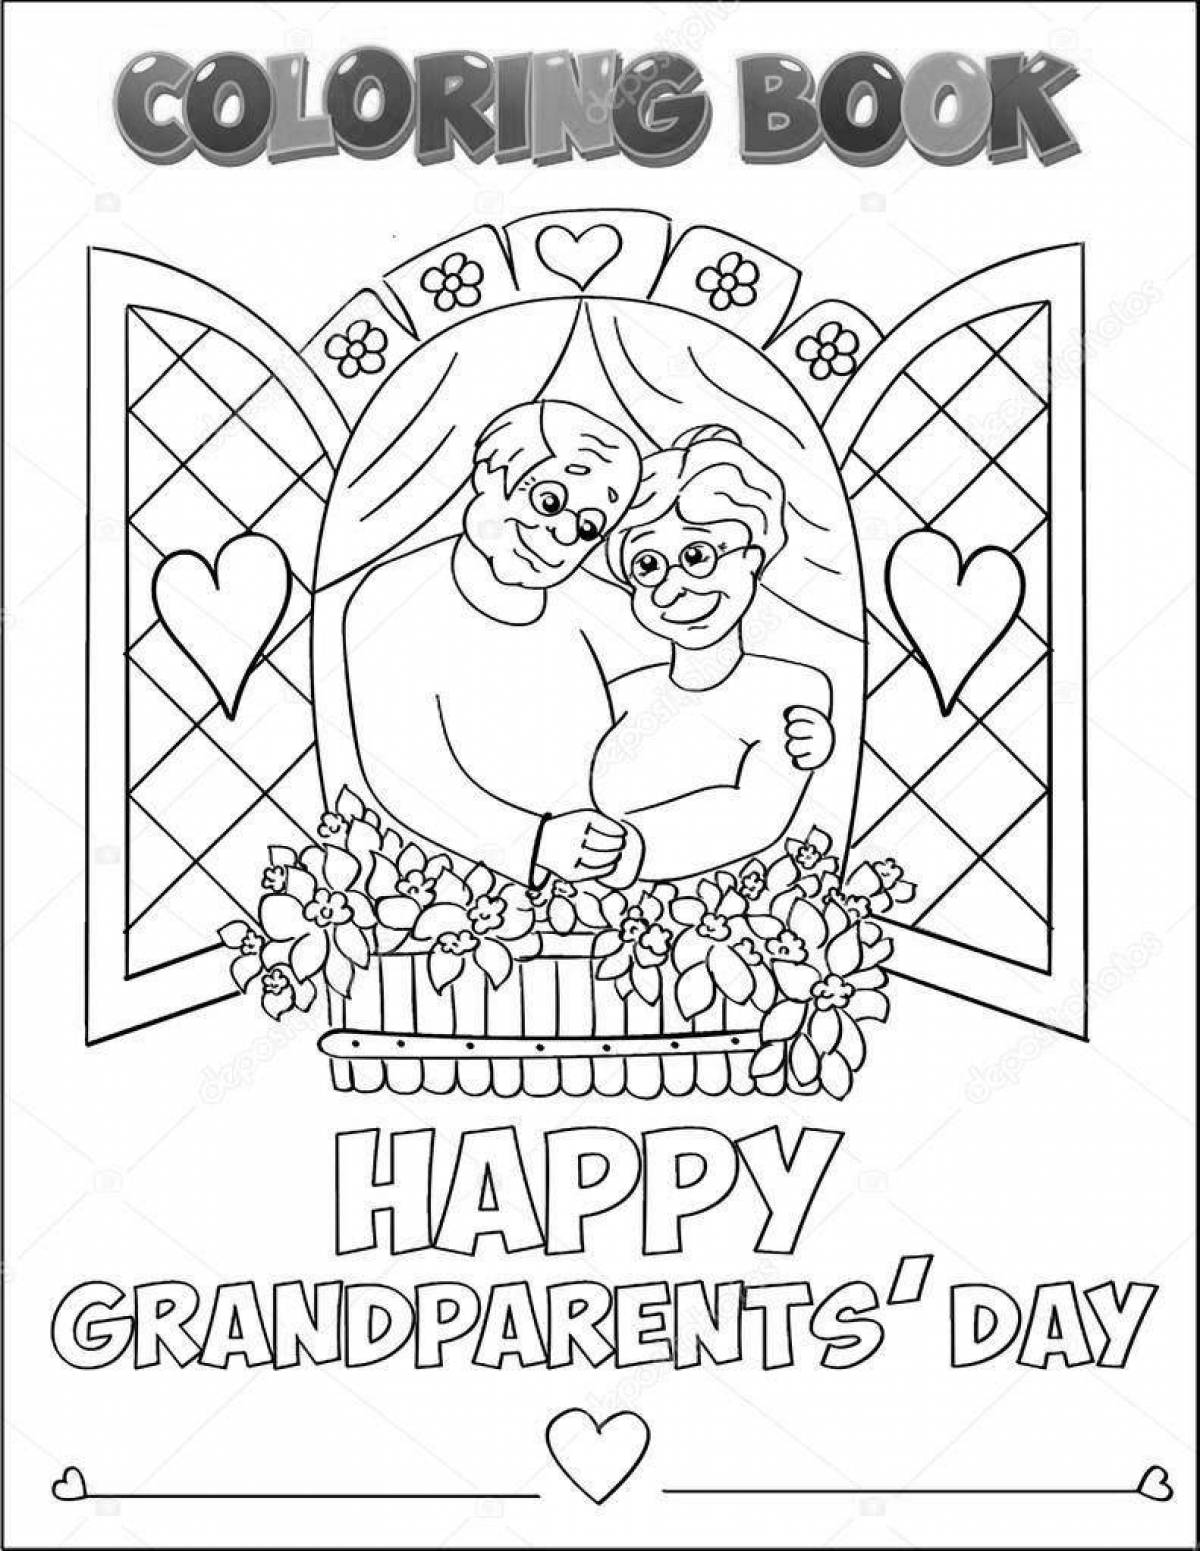 Cute grandfather birthday coloring page from granddaughter